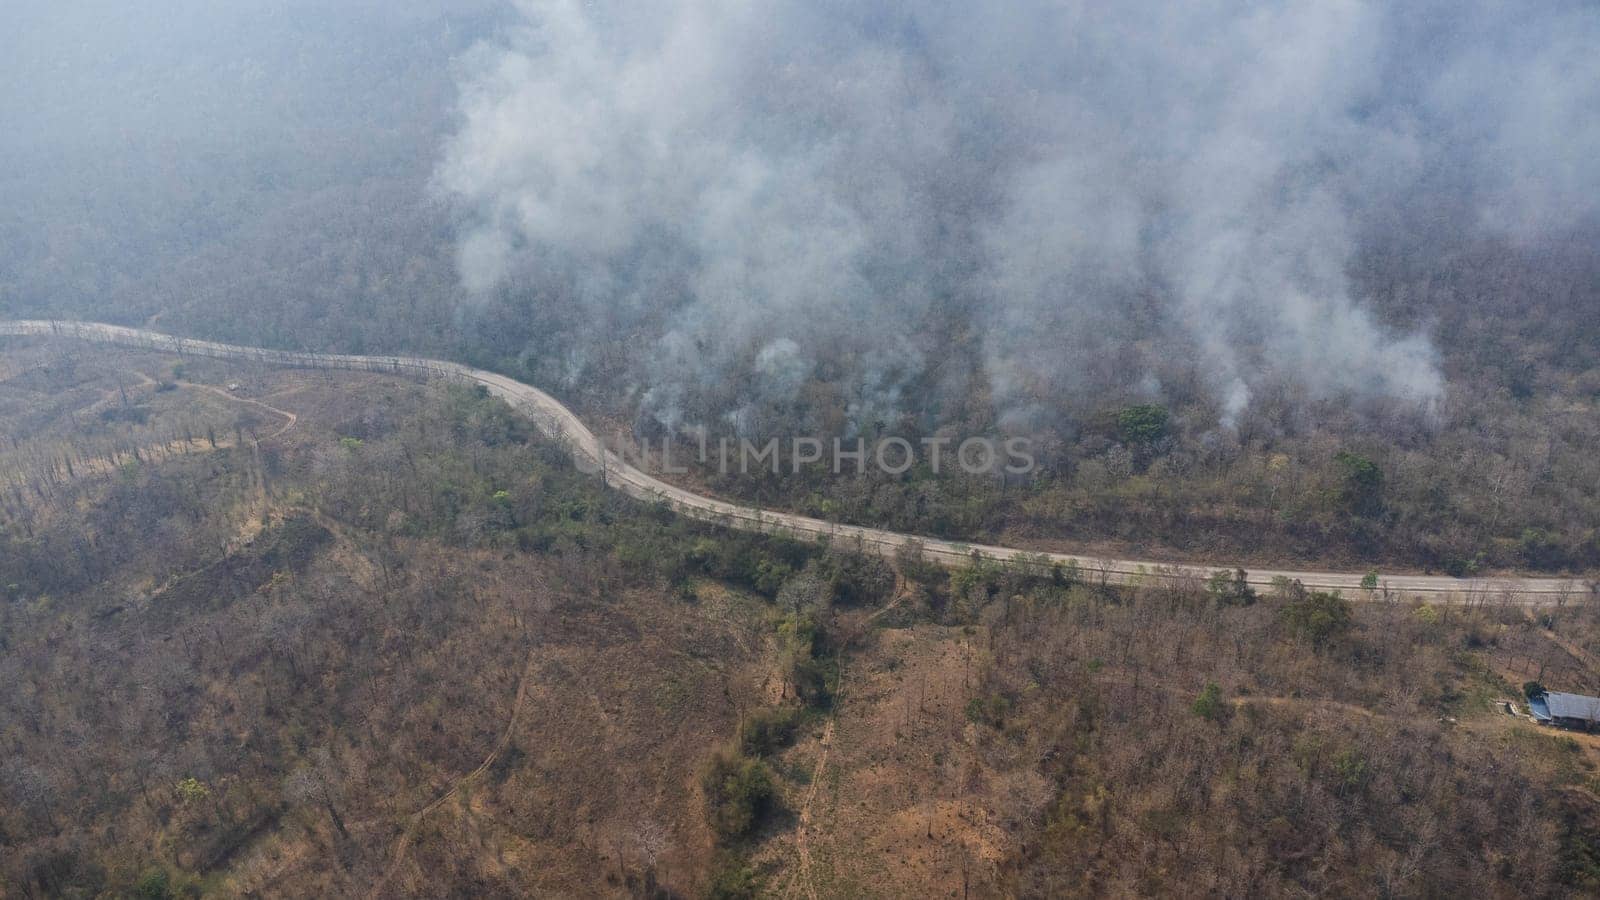 Aerial drone view of a wildfire burning through a forest area, fills the sky with dark smoke in the woods near the edge of the highway. Burning Forest. Air pollution concept